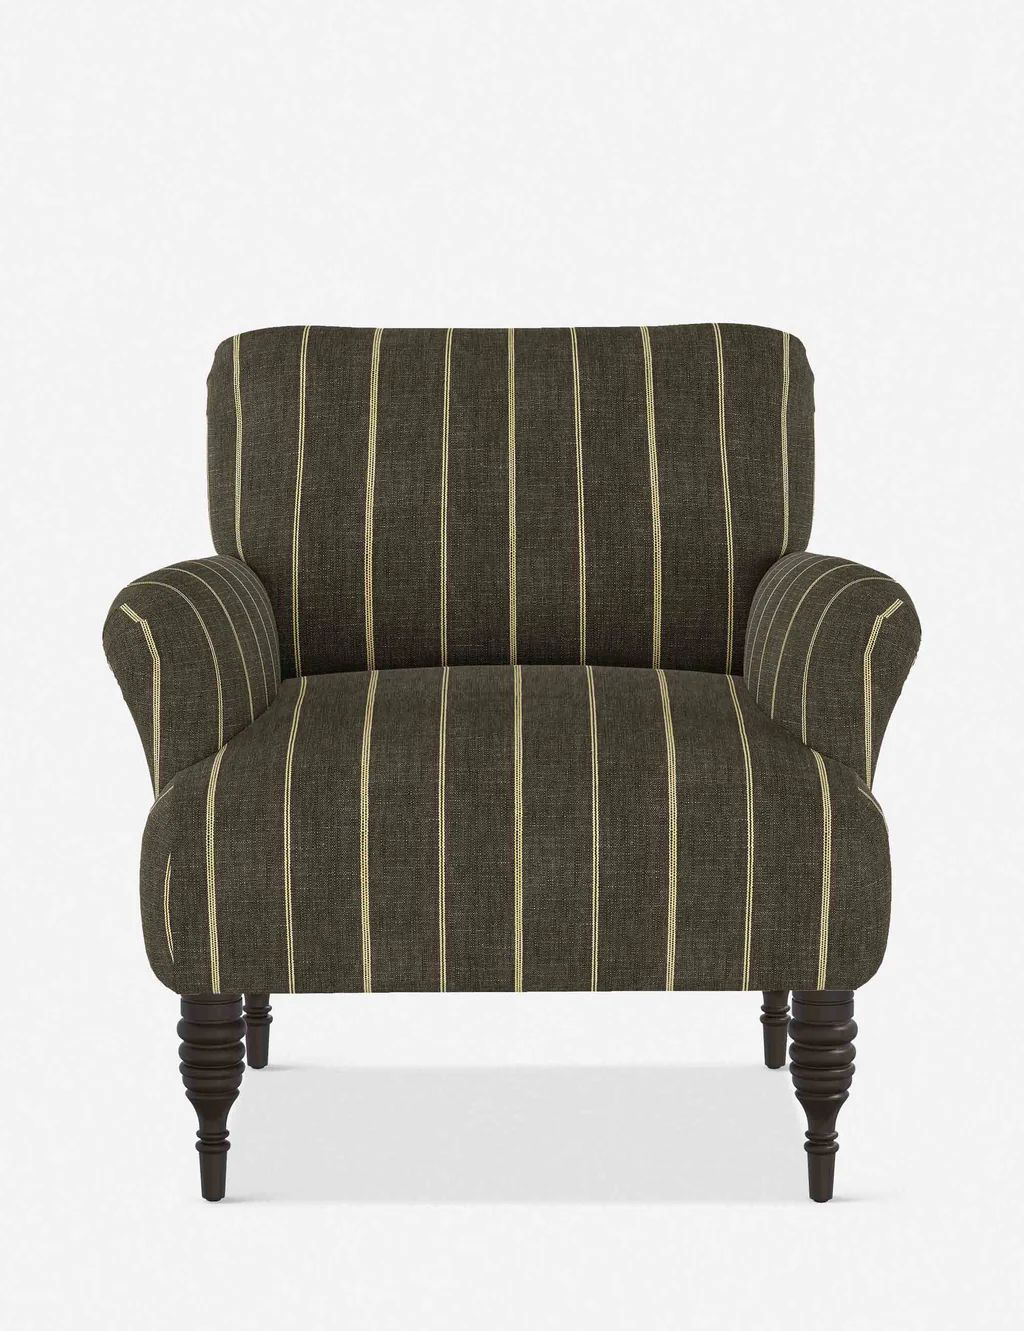 Vyolet Accent Chair | Lulu and Georgia 